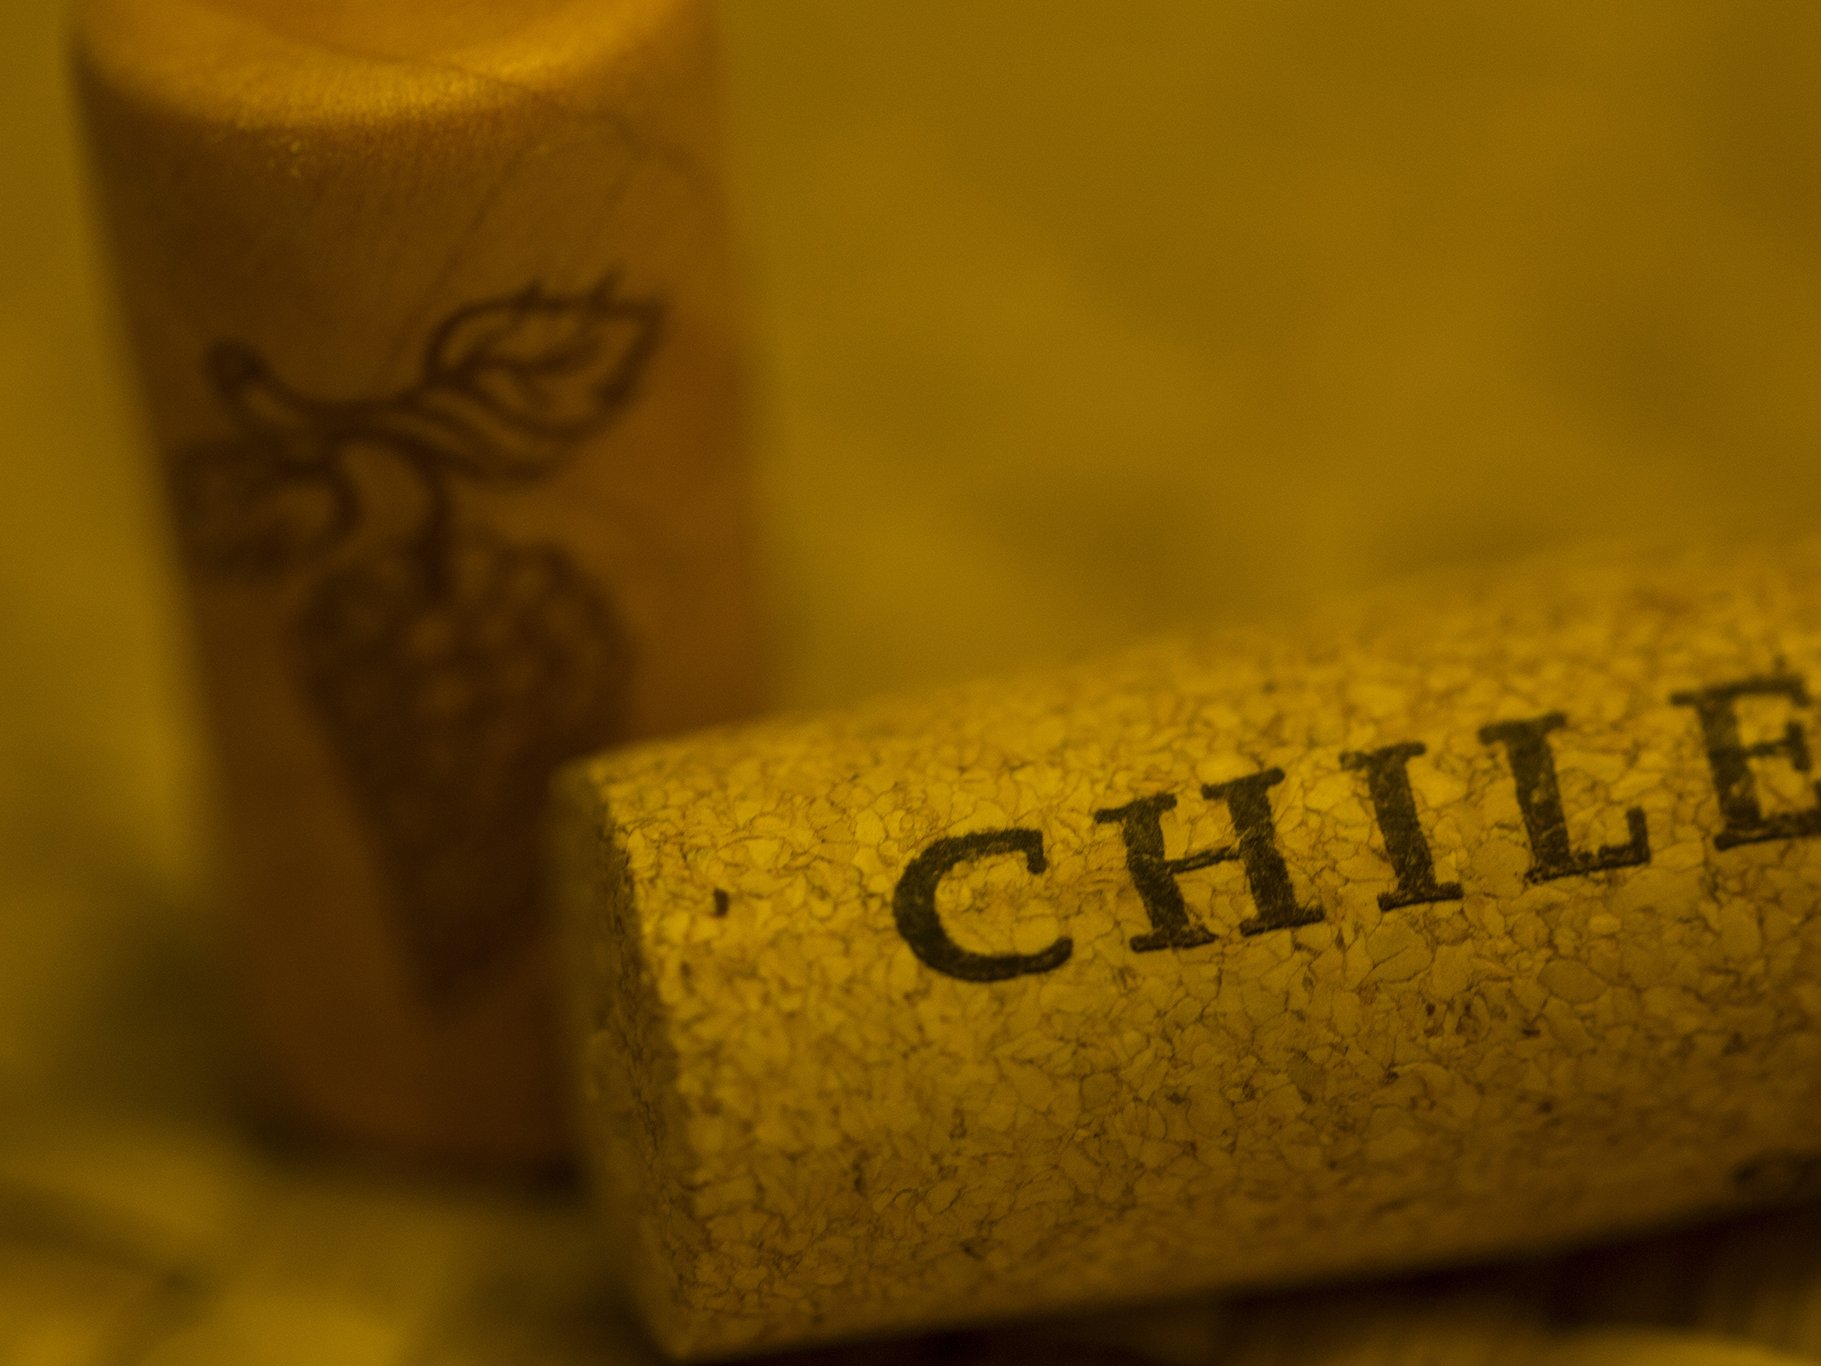 Chile is the fifth largest exporter of wines in the world.